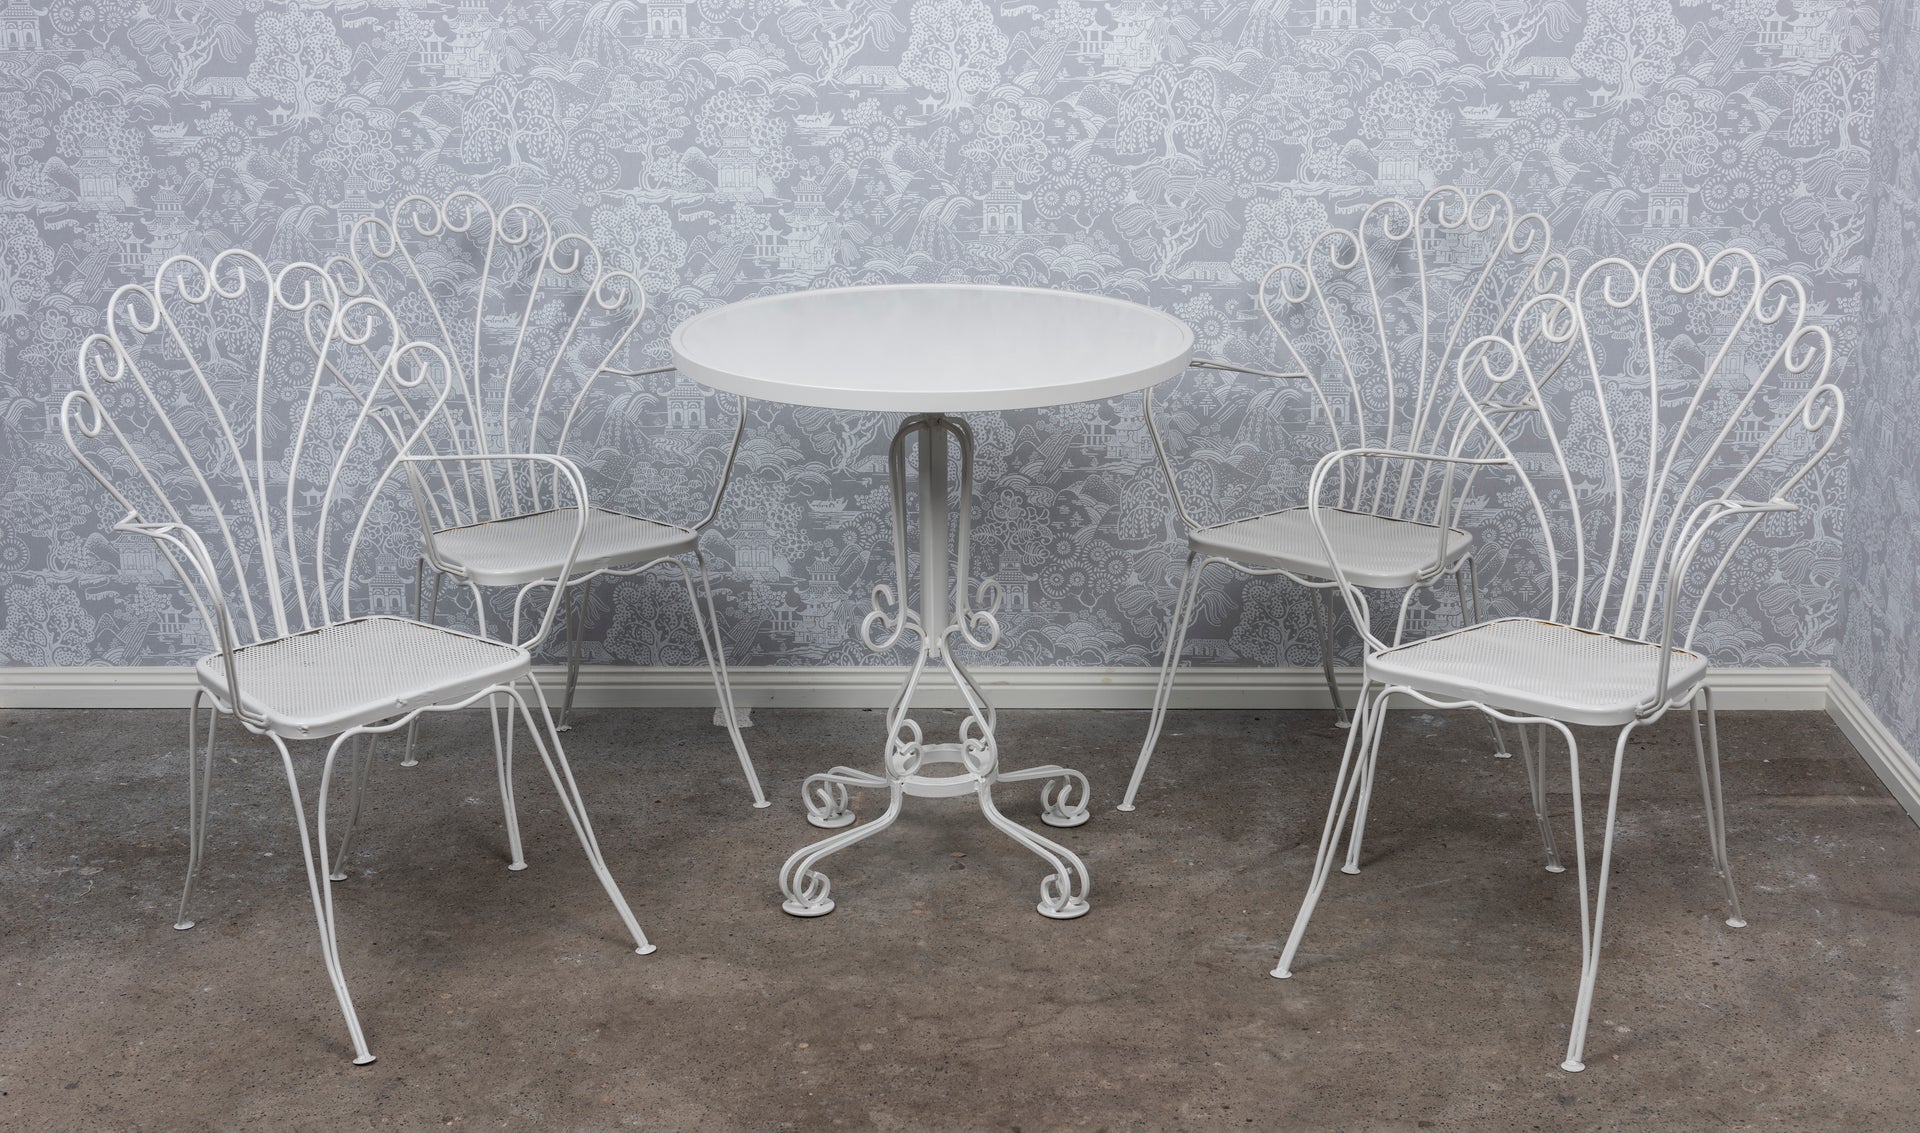 SOLD A very decorative white painted five-piece Garden suite, Italian Circa 1950